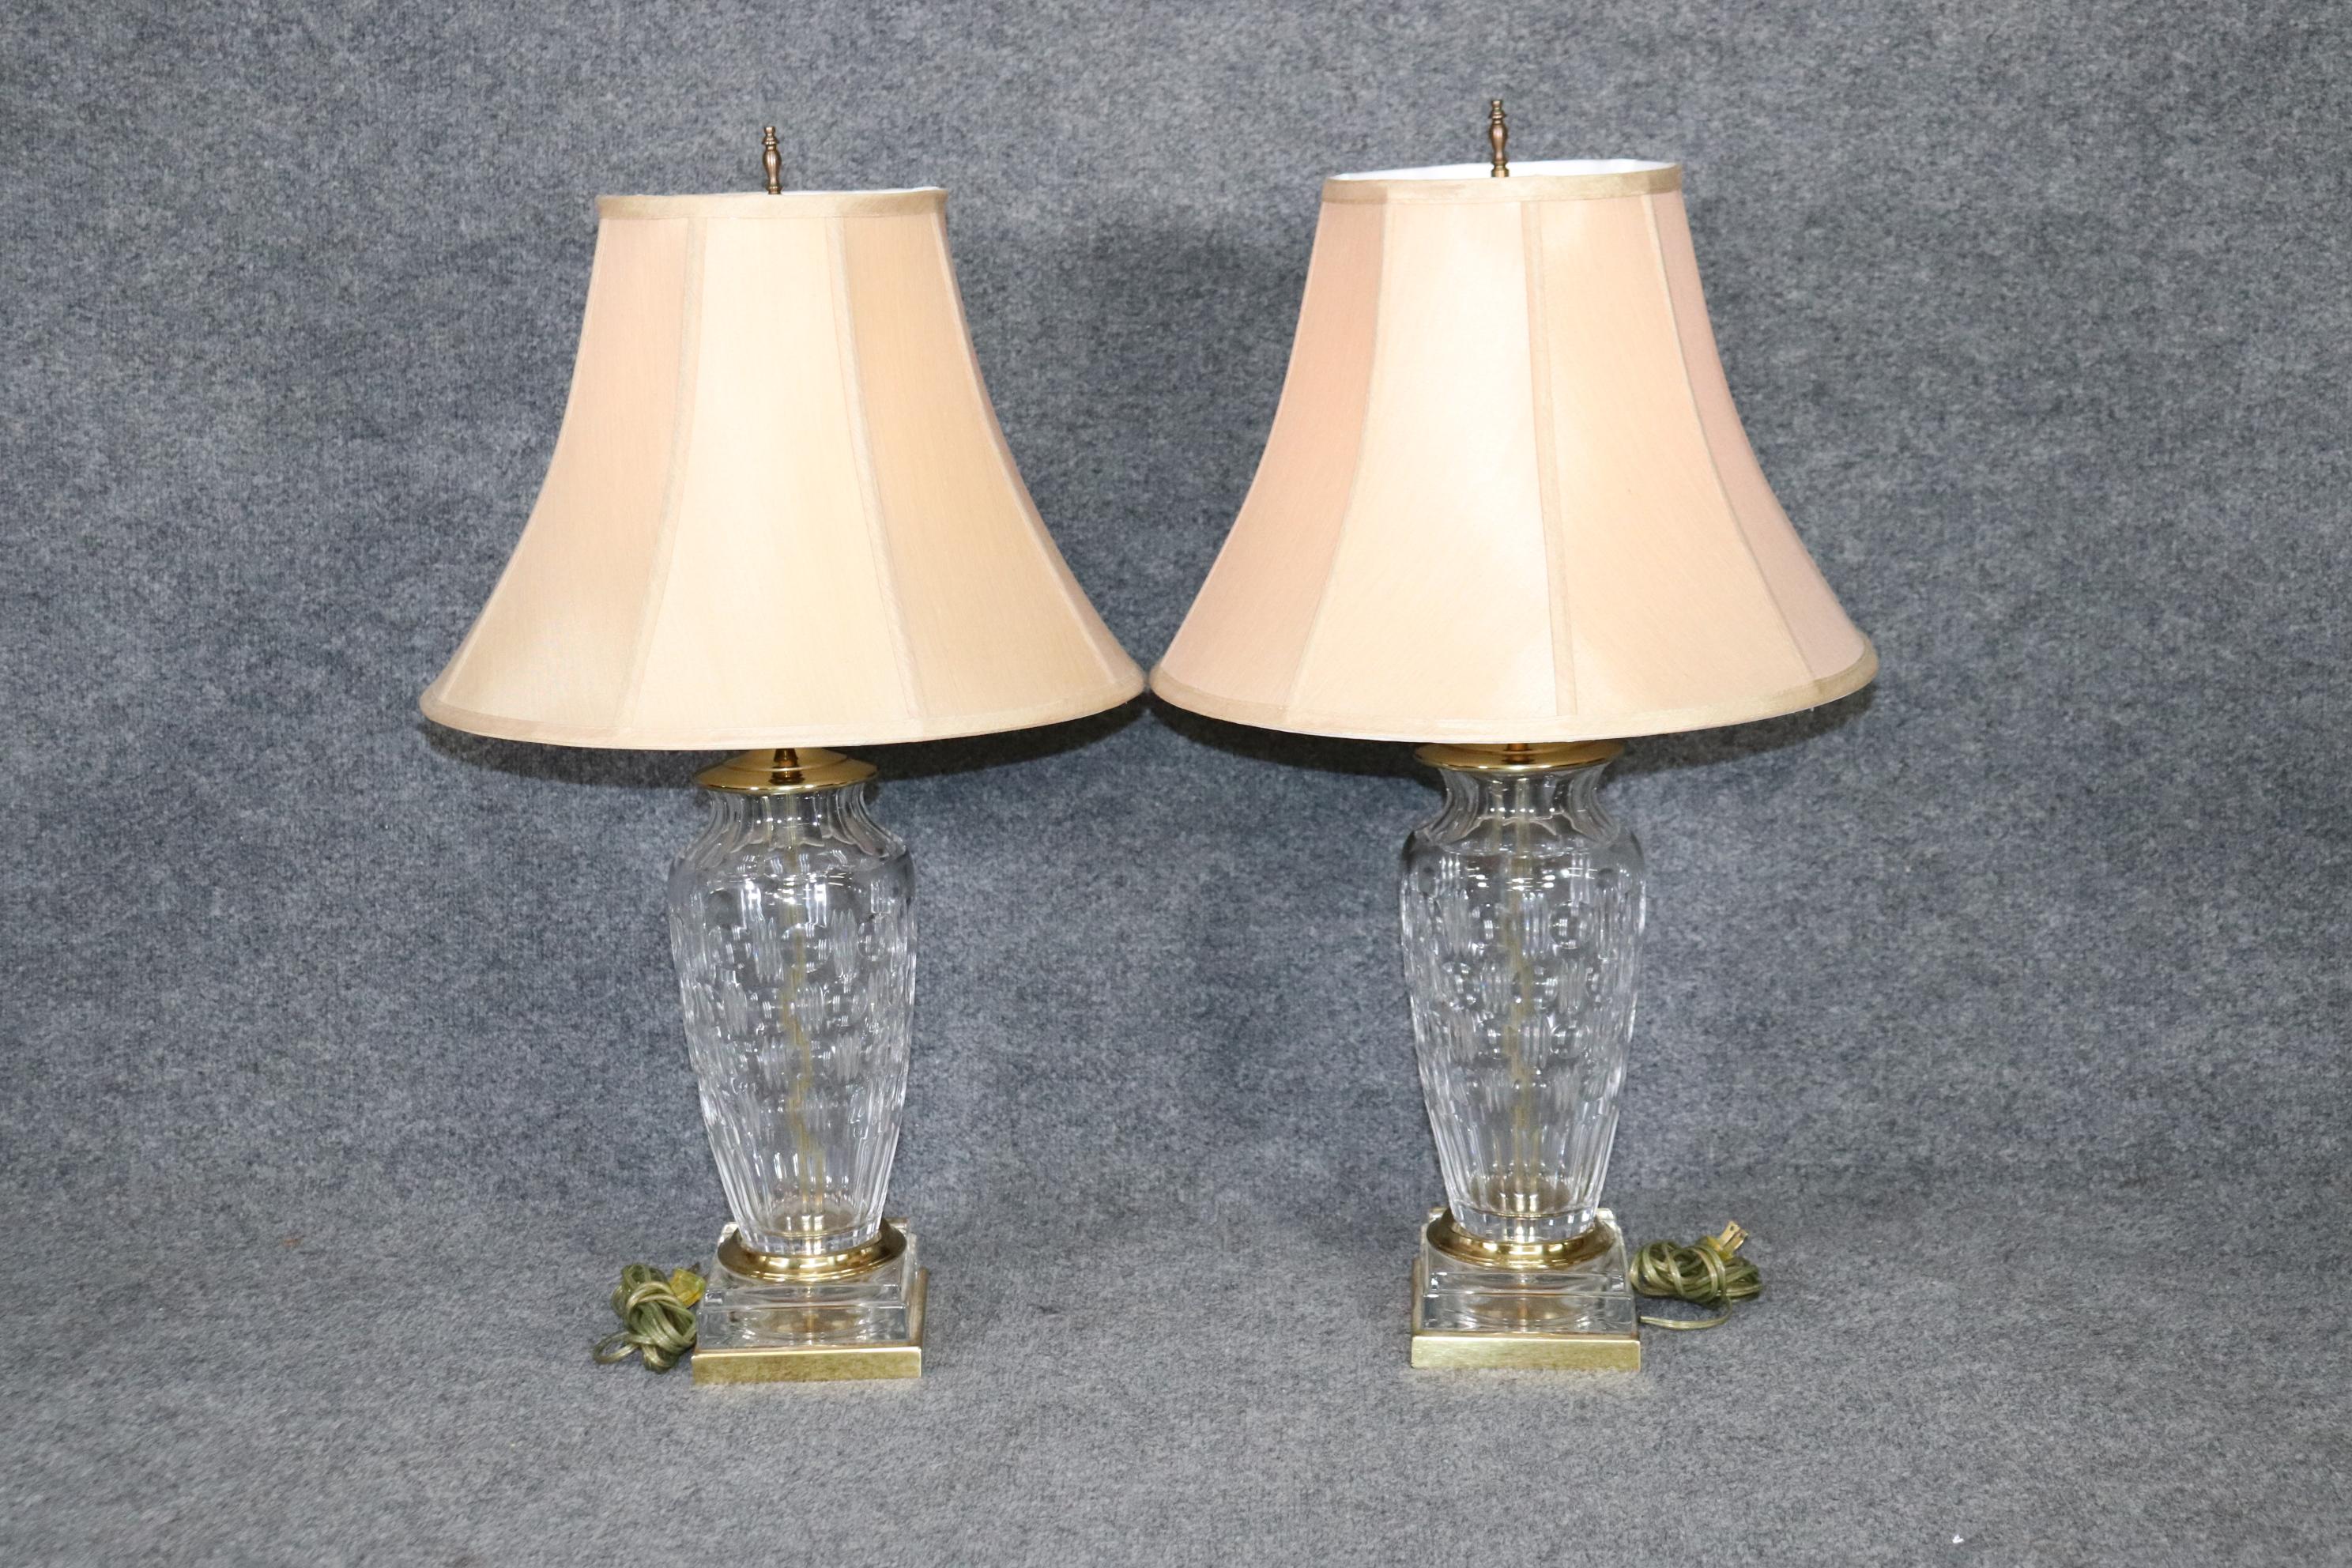 waterford lamps for sale